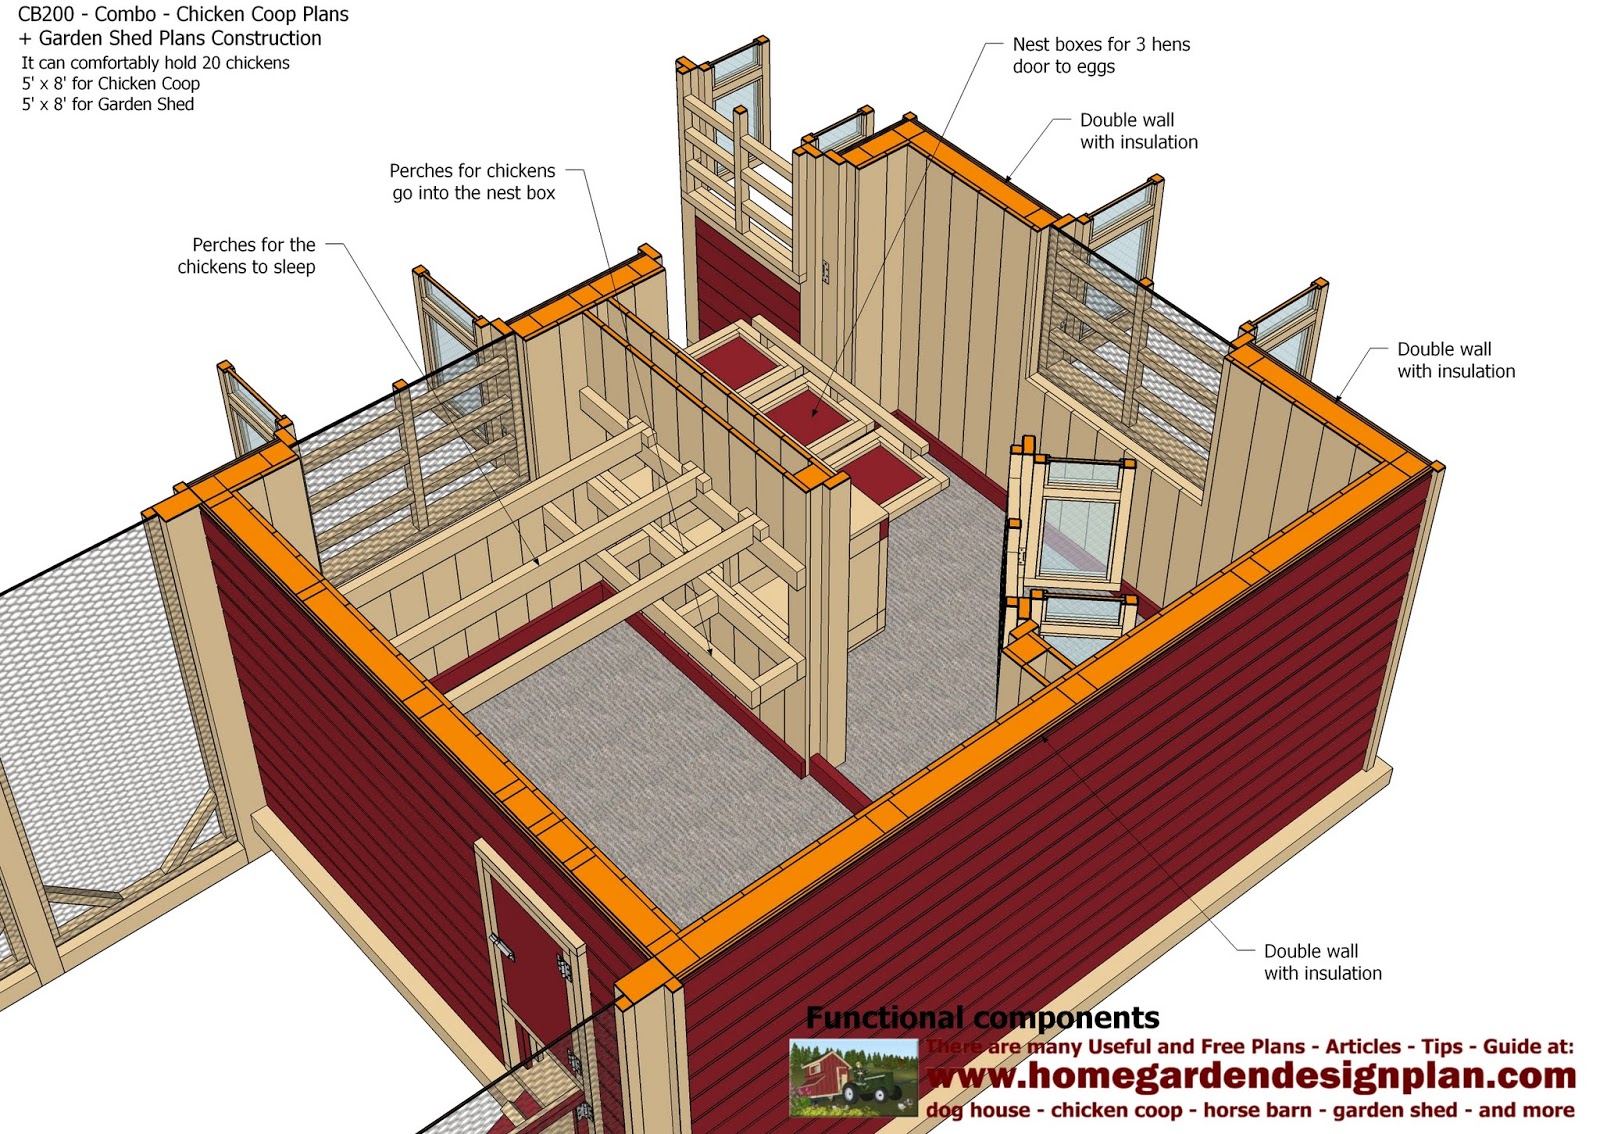 Shed Plans Building CB200 Combo Plans Chicken Coop Plans